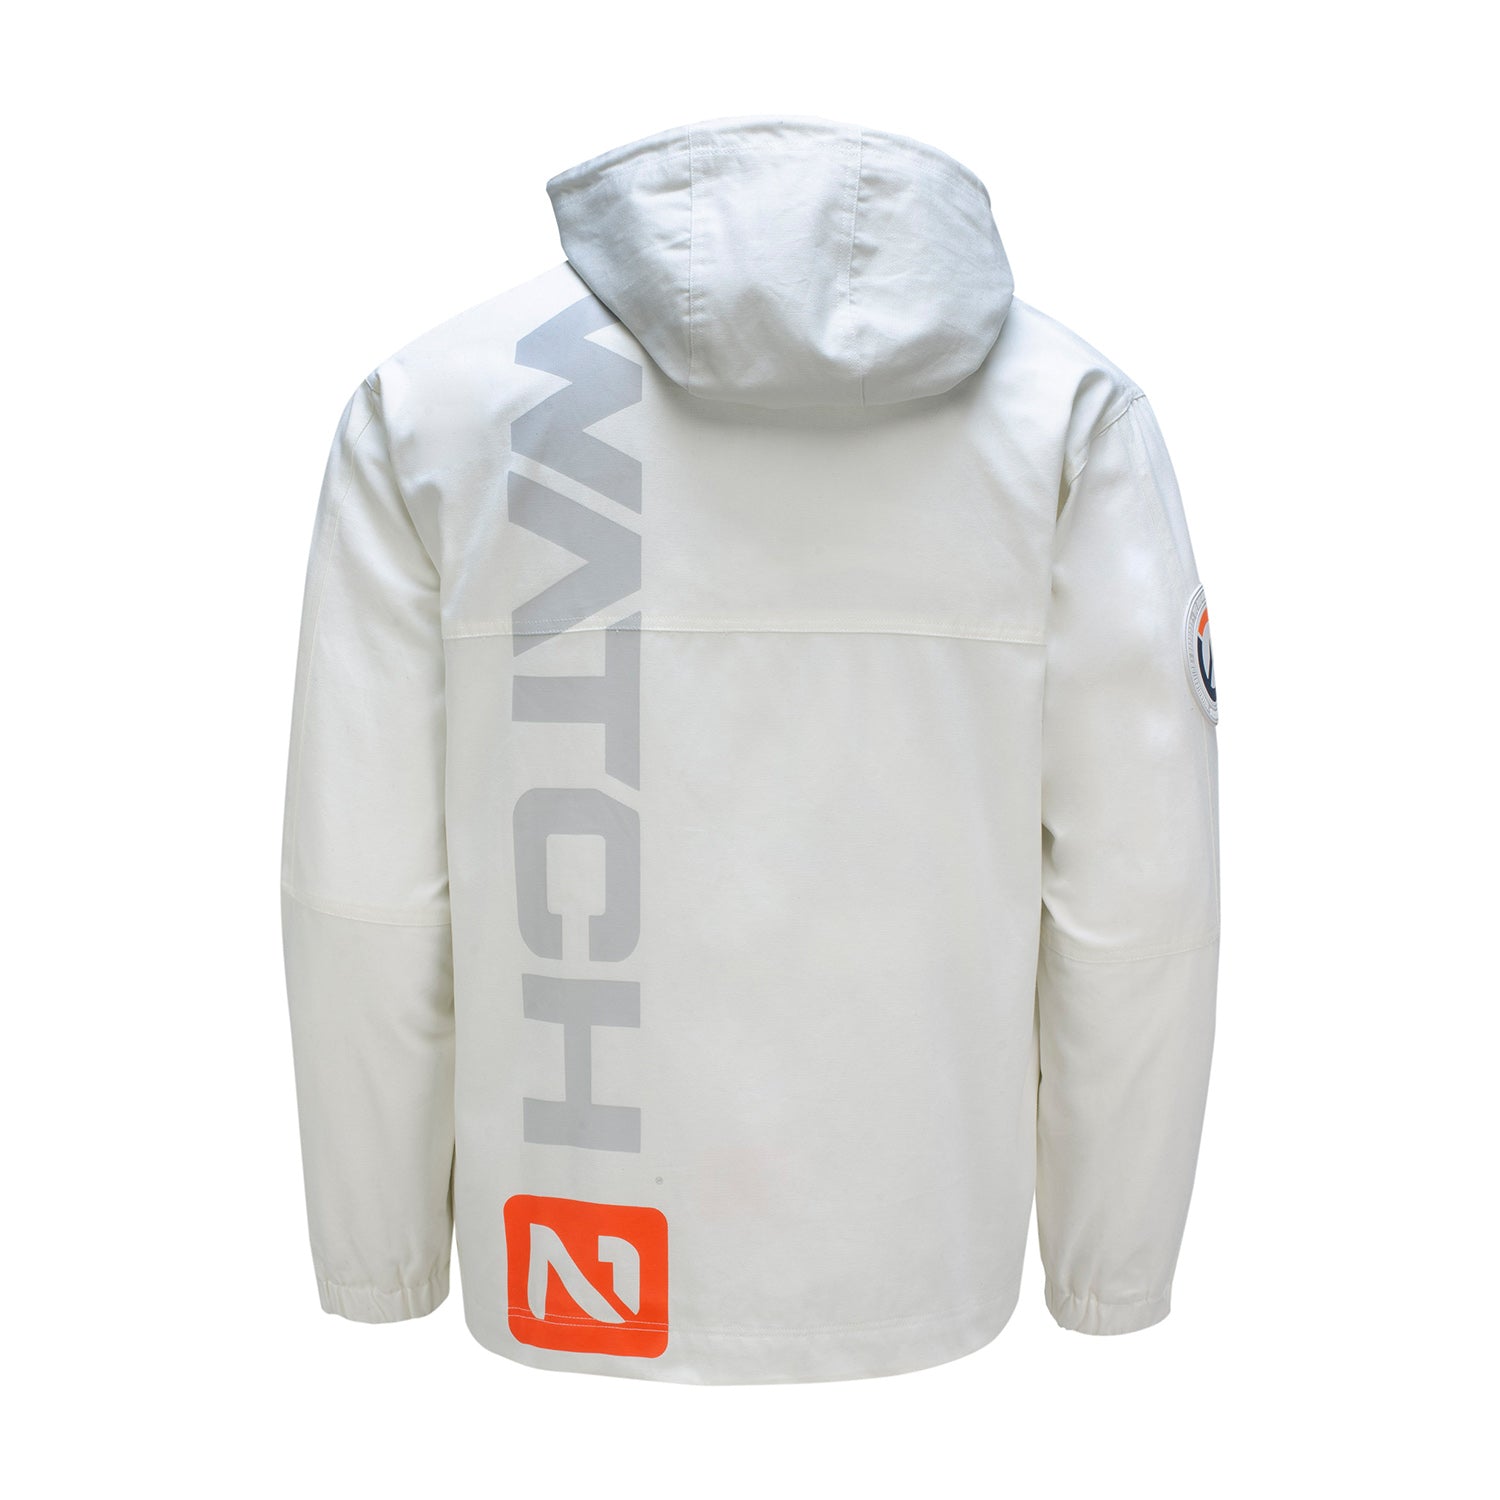 Overwatch 2 Canvas Jacket - Back View